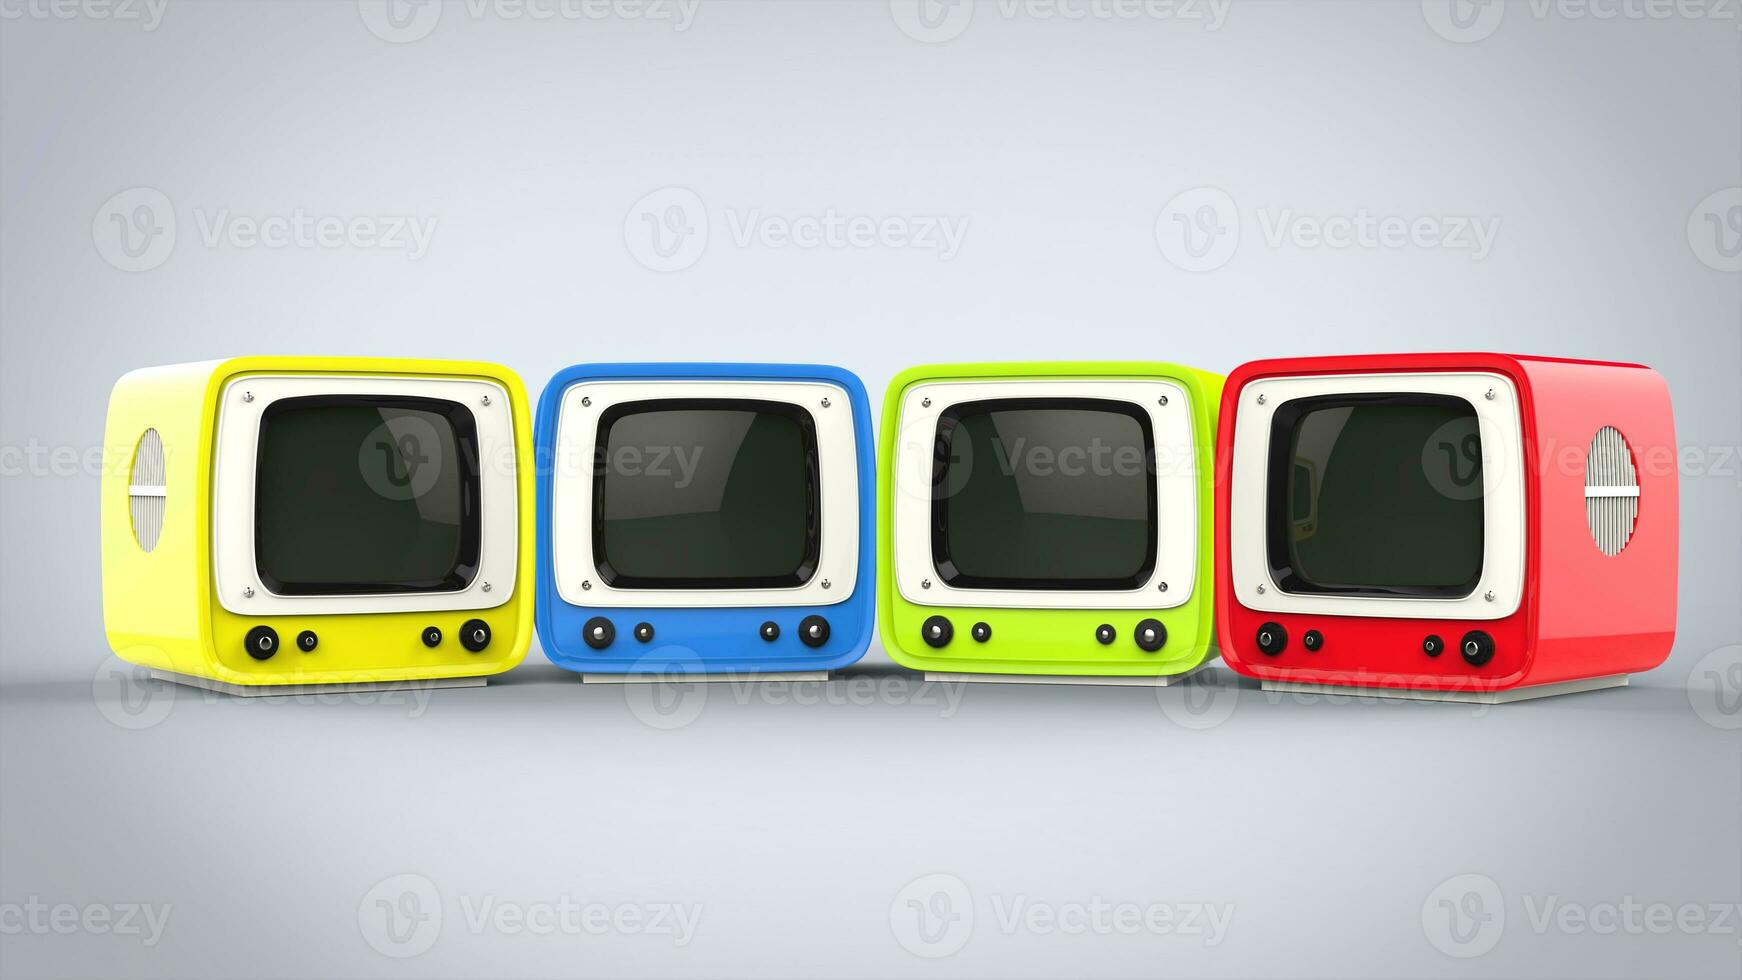 Colorful vintage style television sets photo